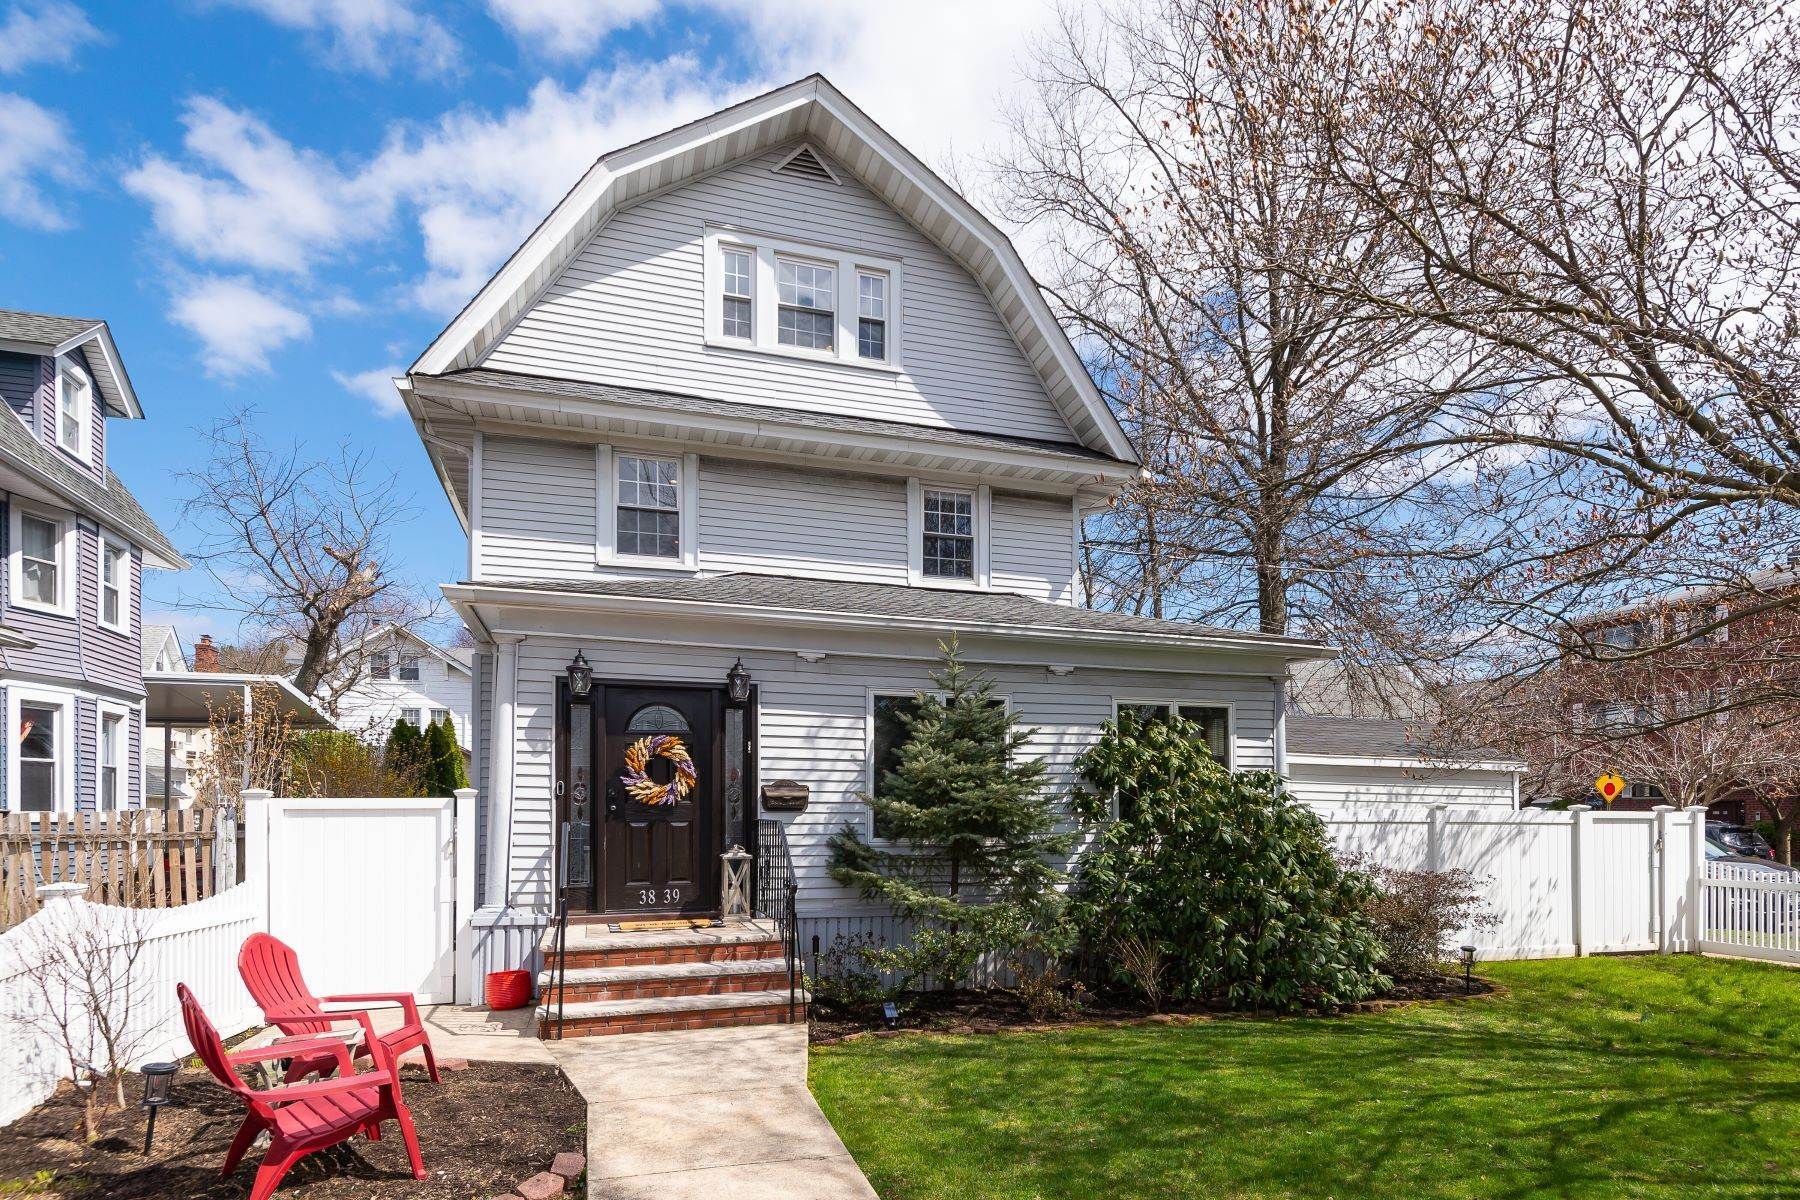 Single Family Homes for Sale at 38-39 211th Street, Bayside, NY 11361 38-39 211th Street Bayside, New York 11361 United States